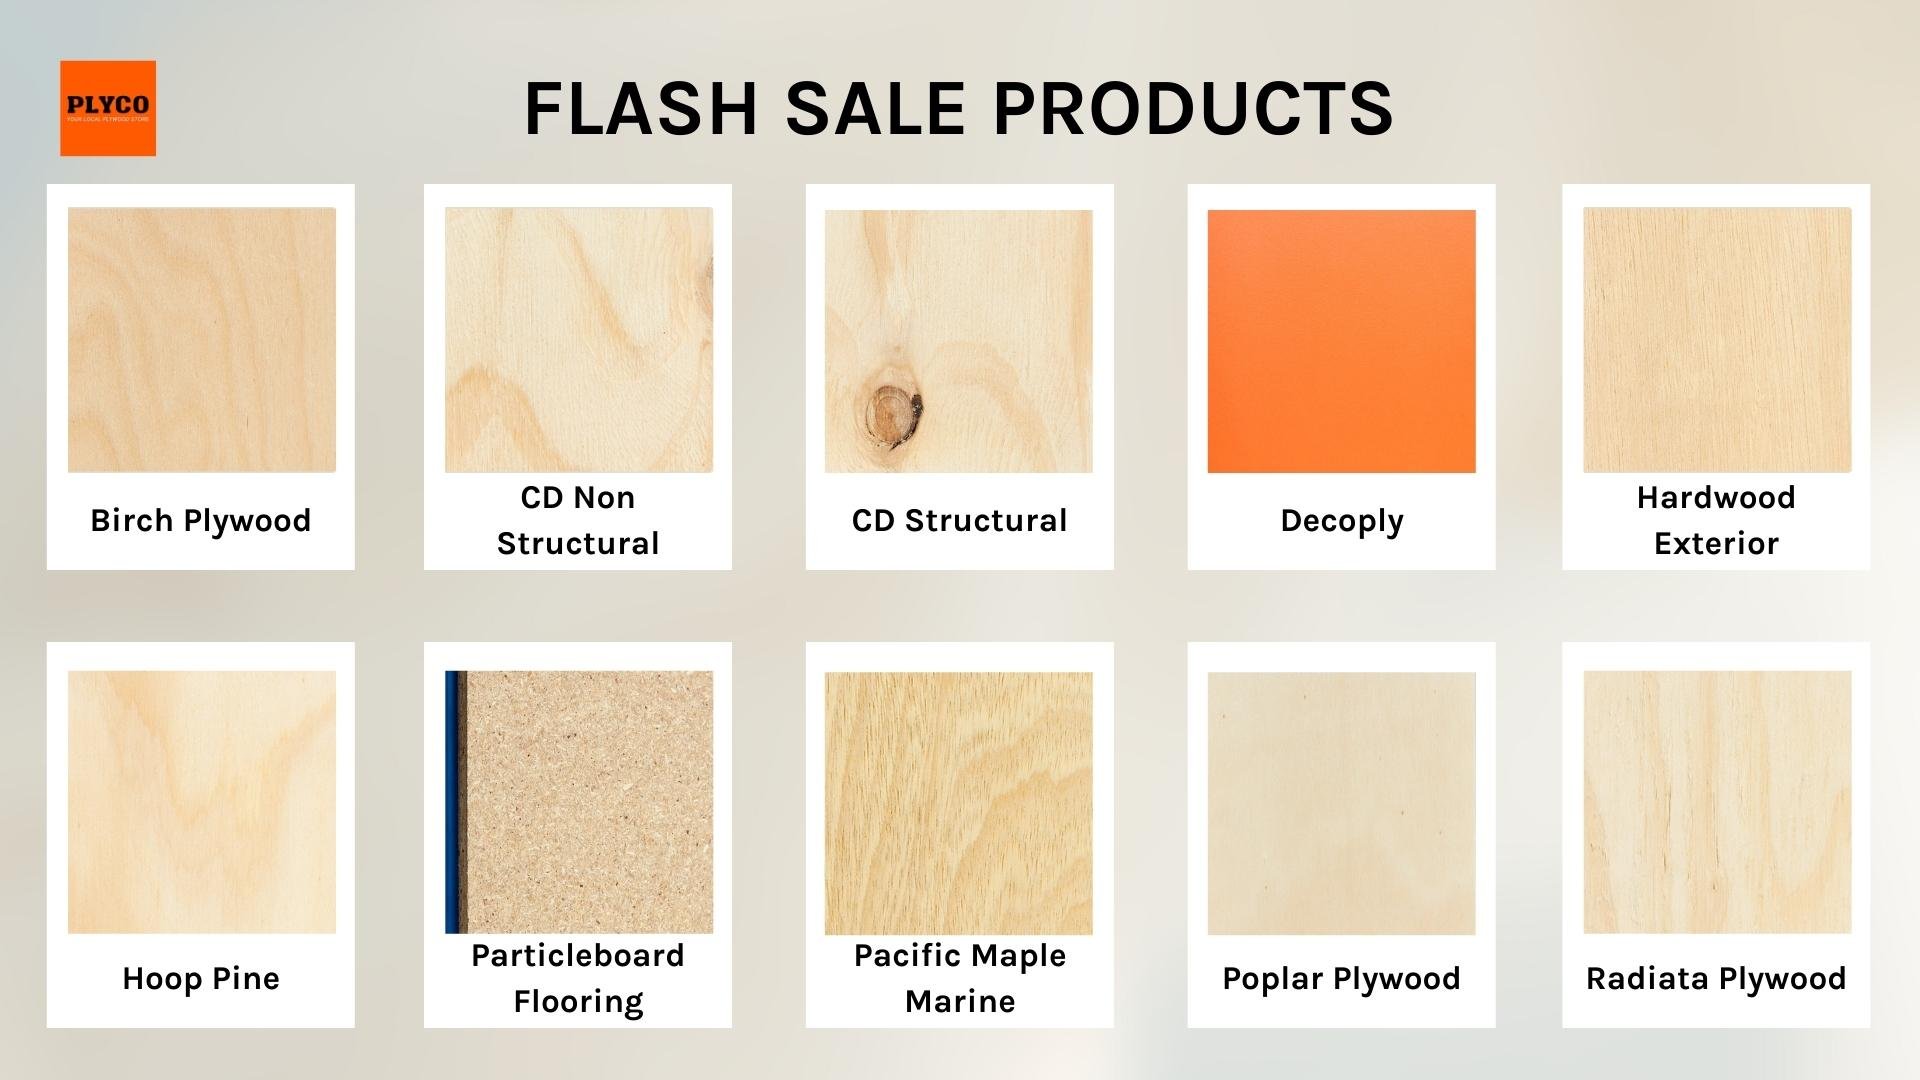 Plywood and timber veneer products available during Plyco's April 2022 Flash Sale